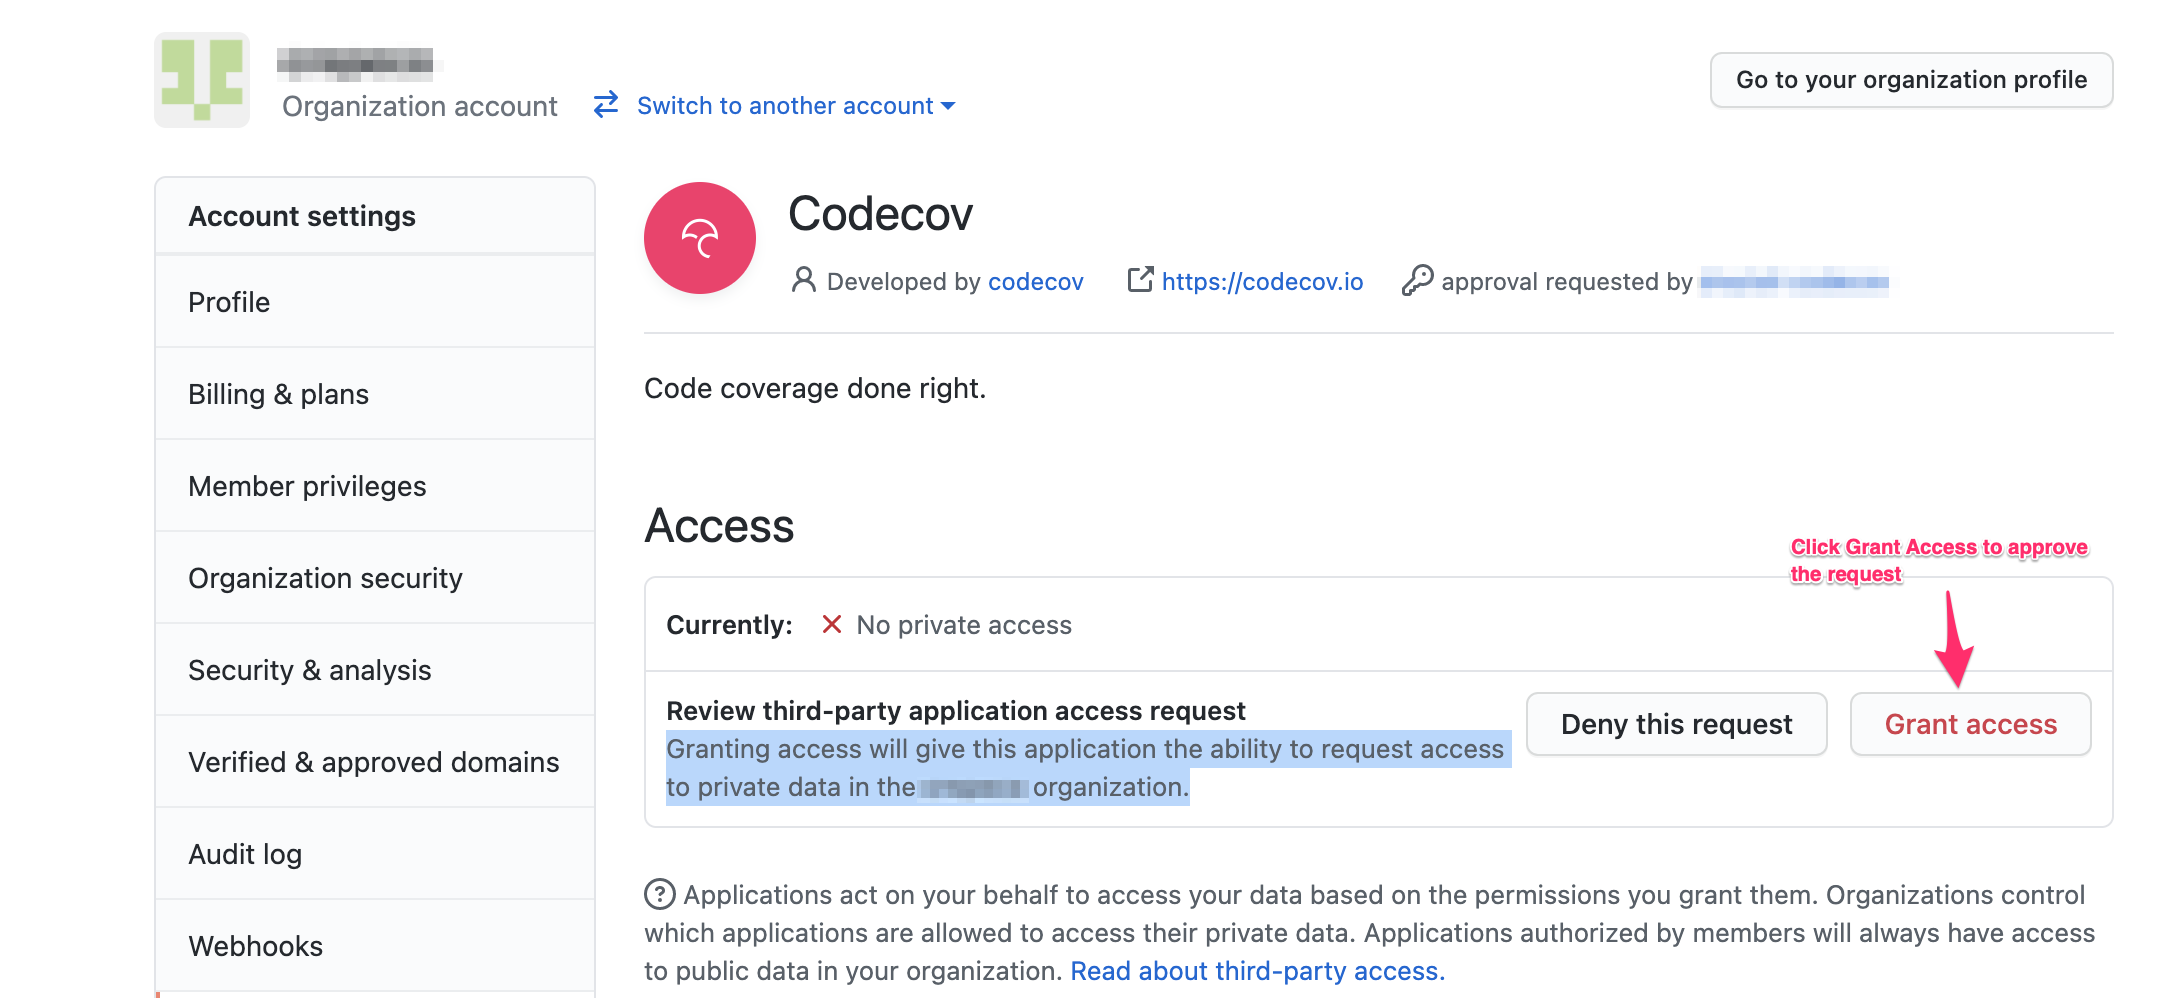 The Codecov application access approval page.